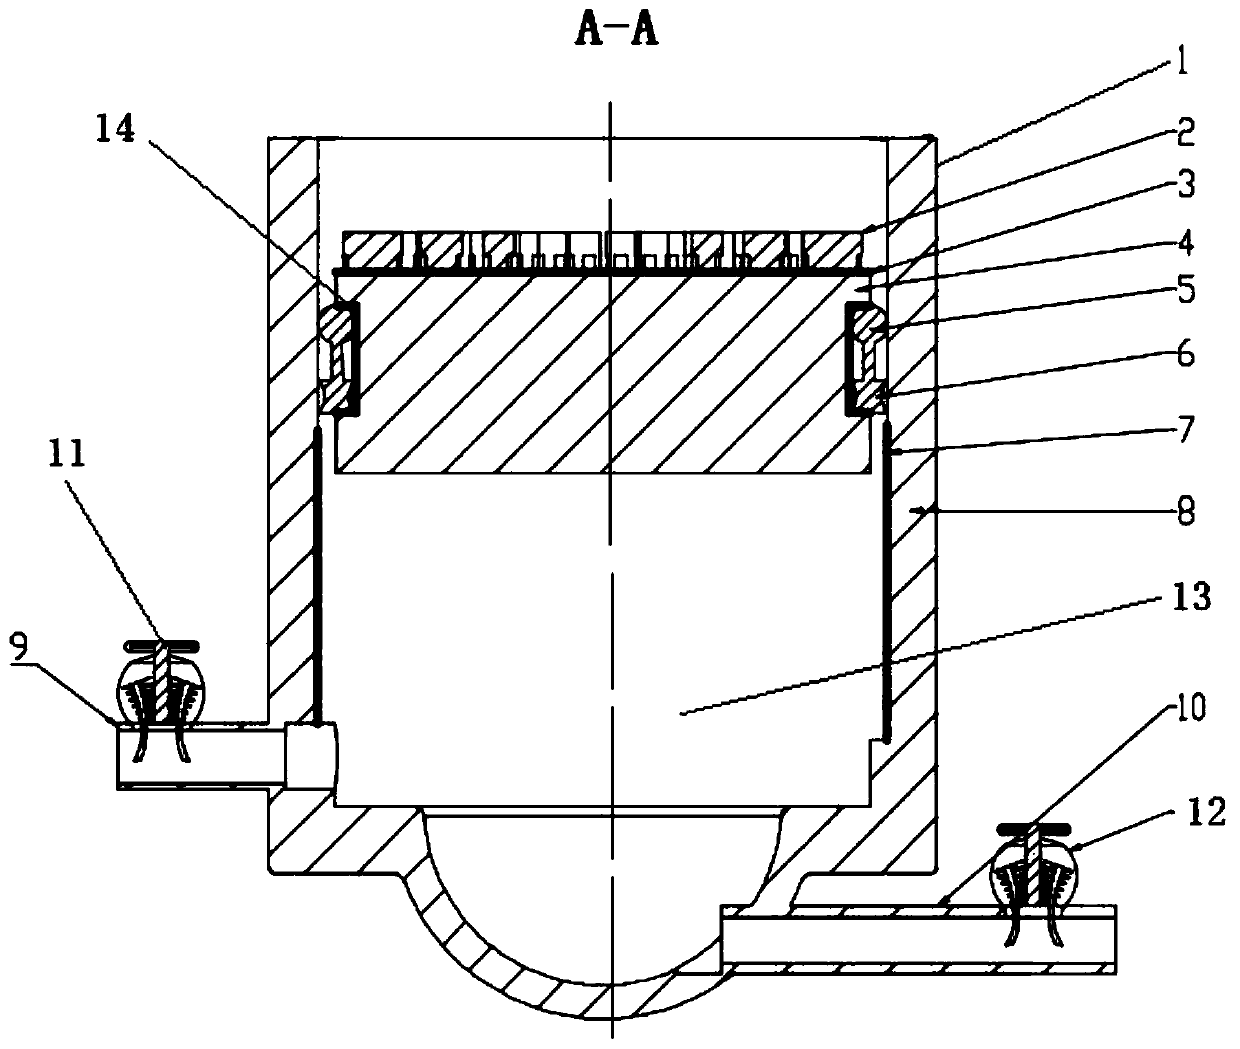 Novel water pumping energy storage device